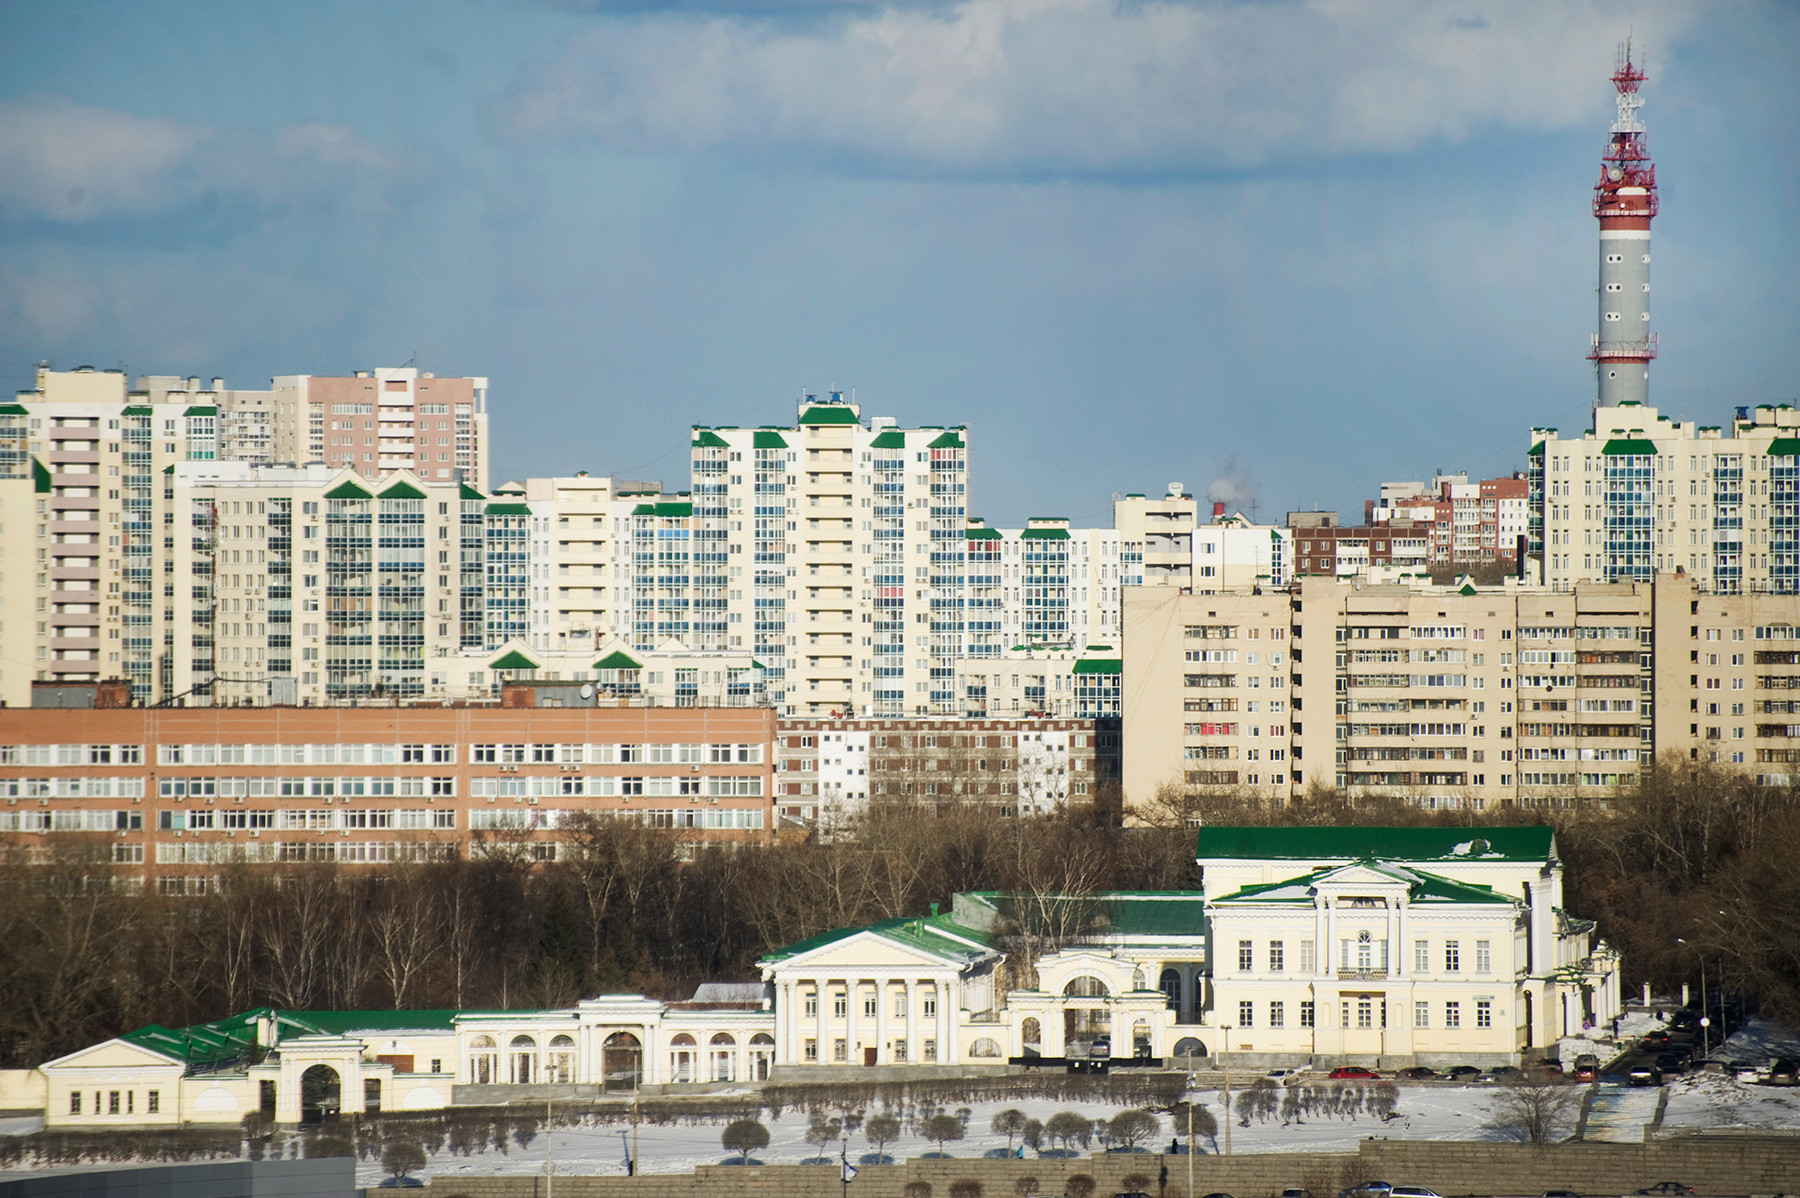 Rastorguev-Kharitonov Mansion. Side facade with high-rise apartment buildings in background. April 1, 2017.